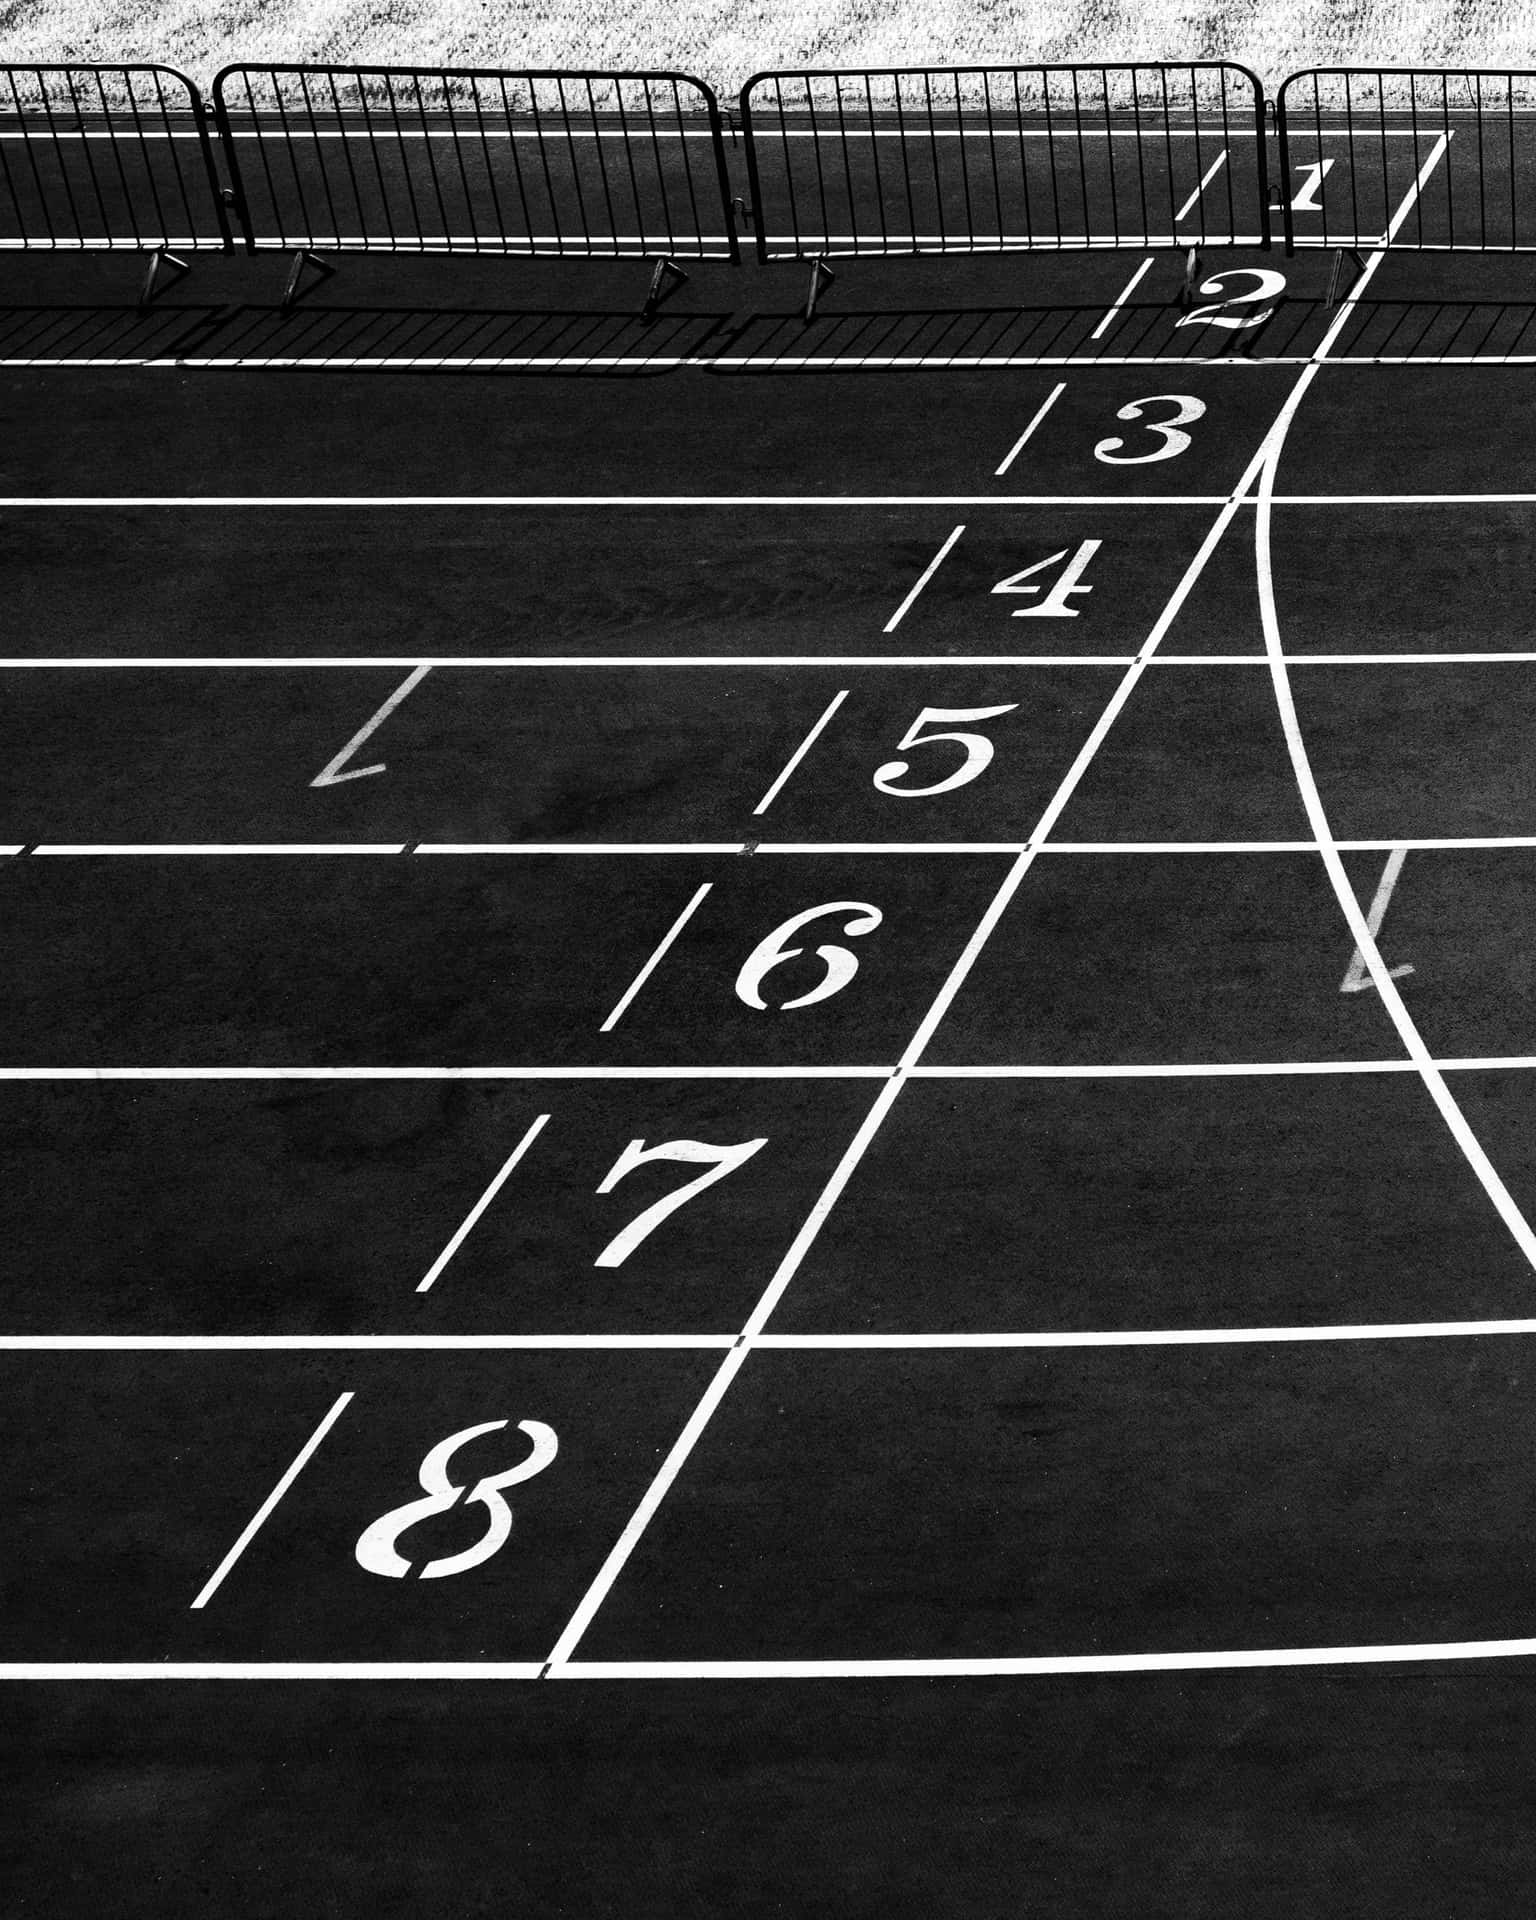 A Black And White Photo Of A Track